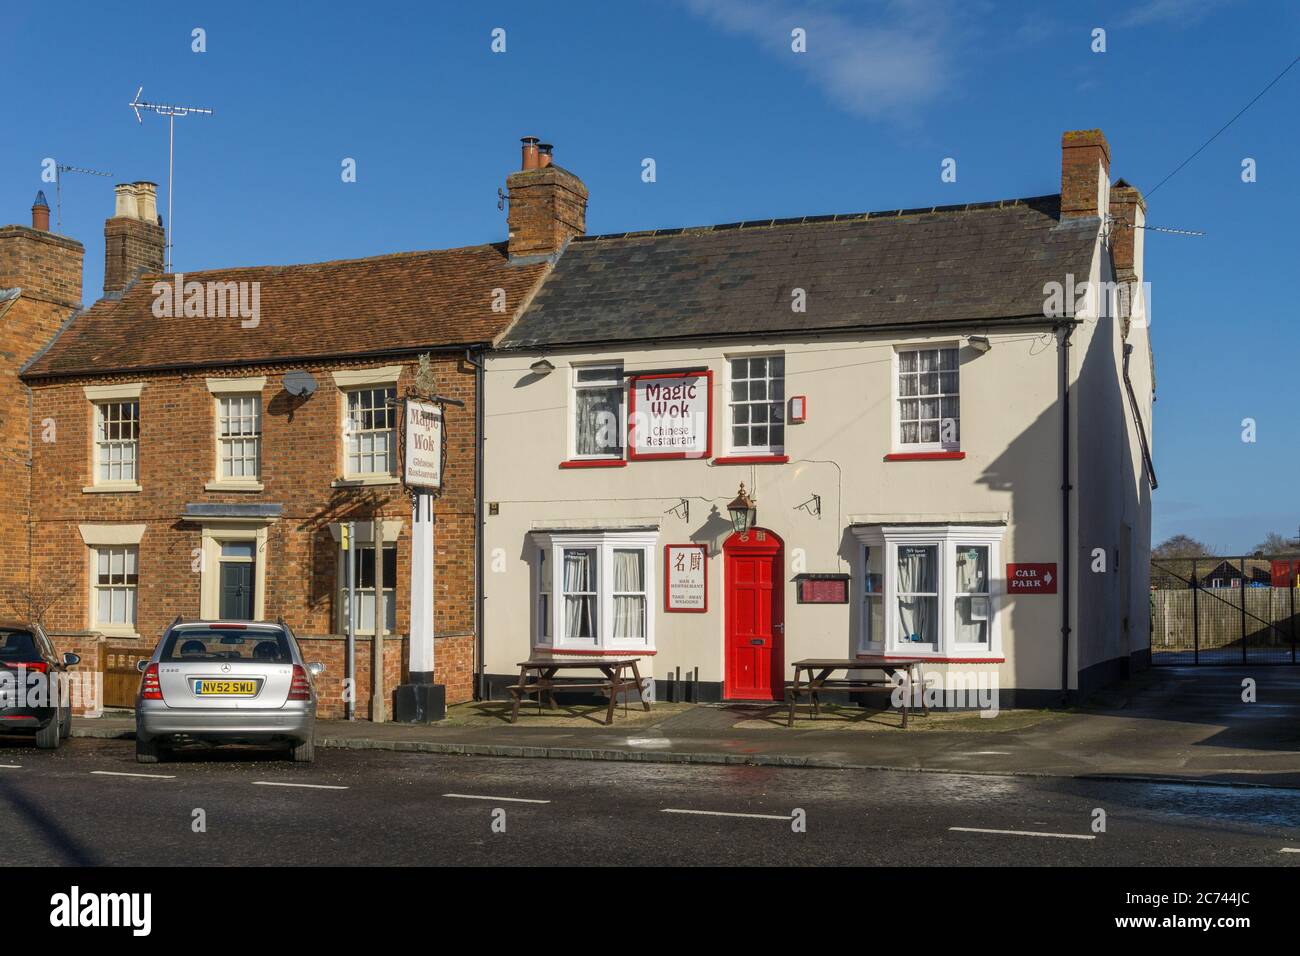 The Magic Wok, a popular Chinese Restaurant and Takeaway, situated in a former pub building, Newport Pagnell, Buckinghamshire, UK Stock Photo